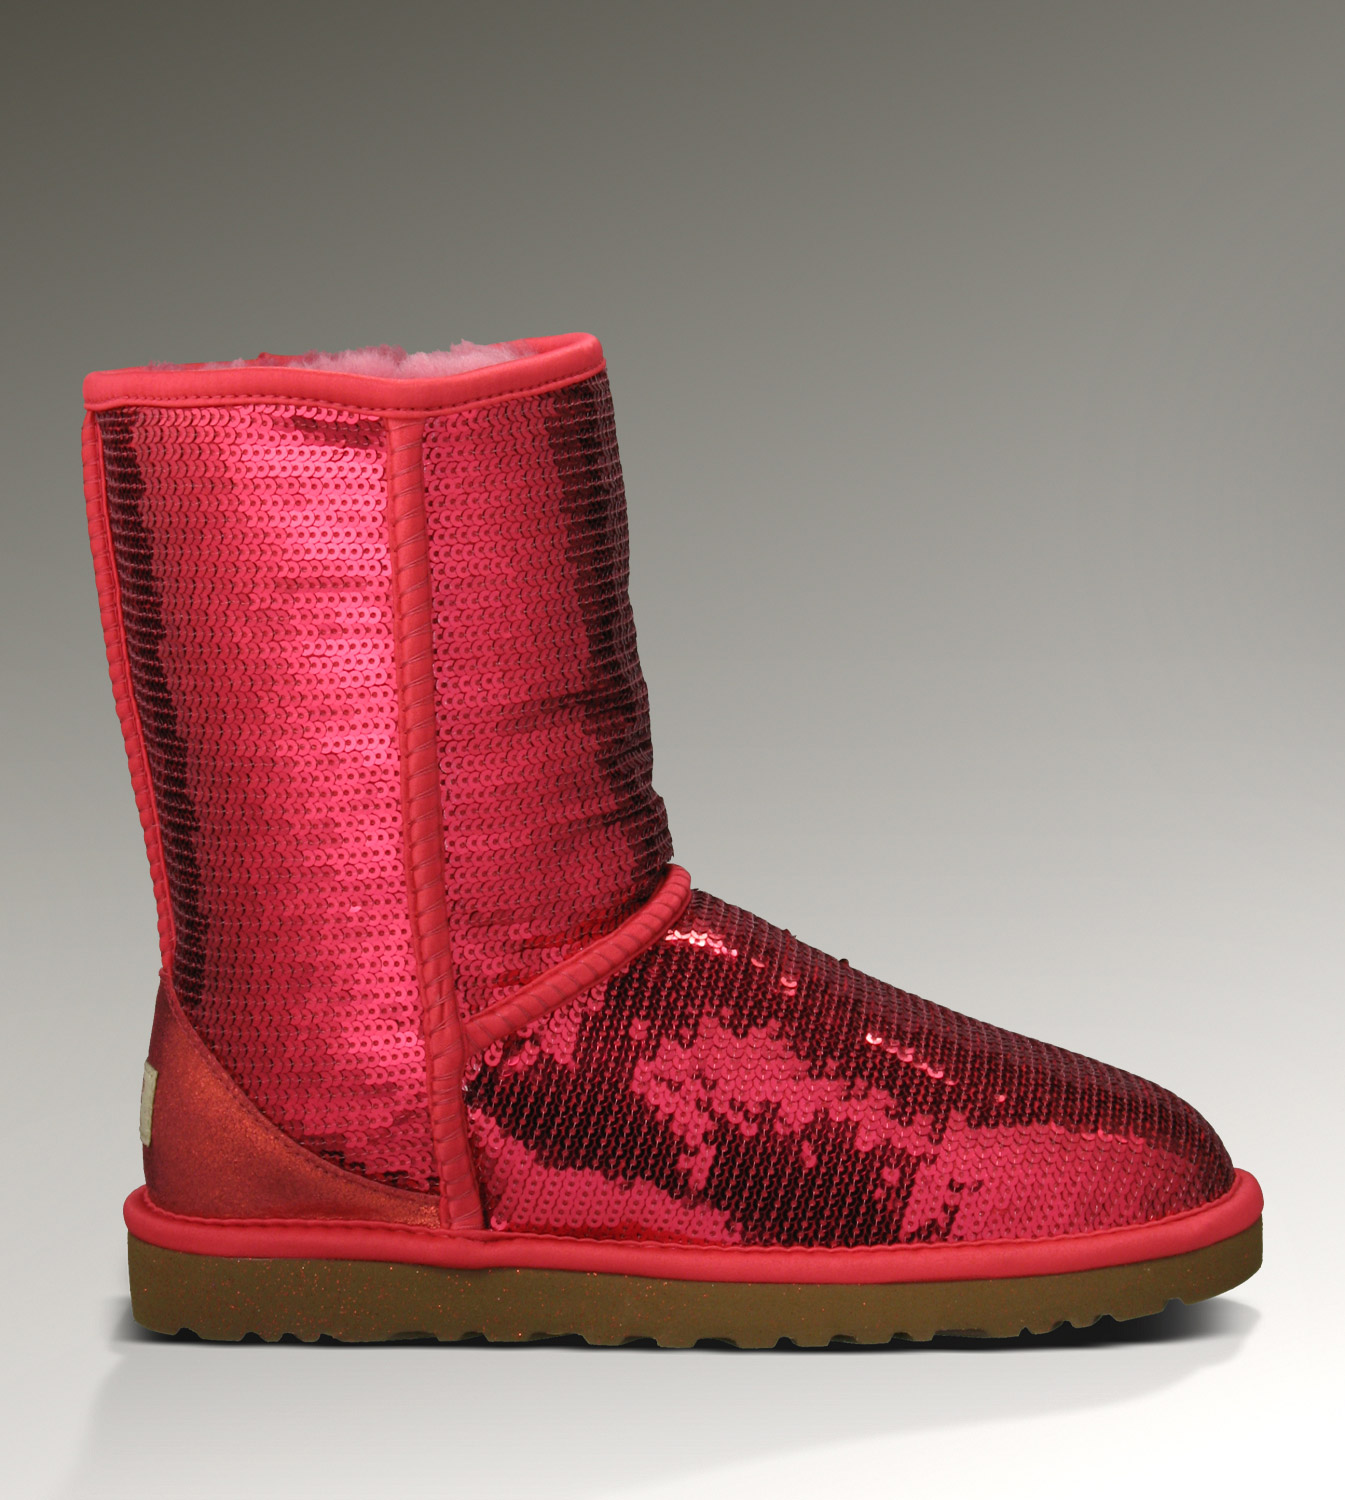 UGG Classico Breve Sparkles 3161 Red Boots